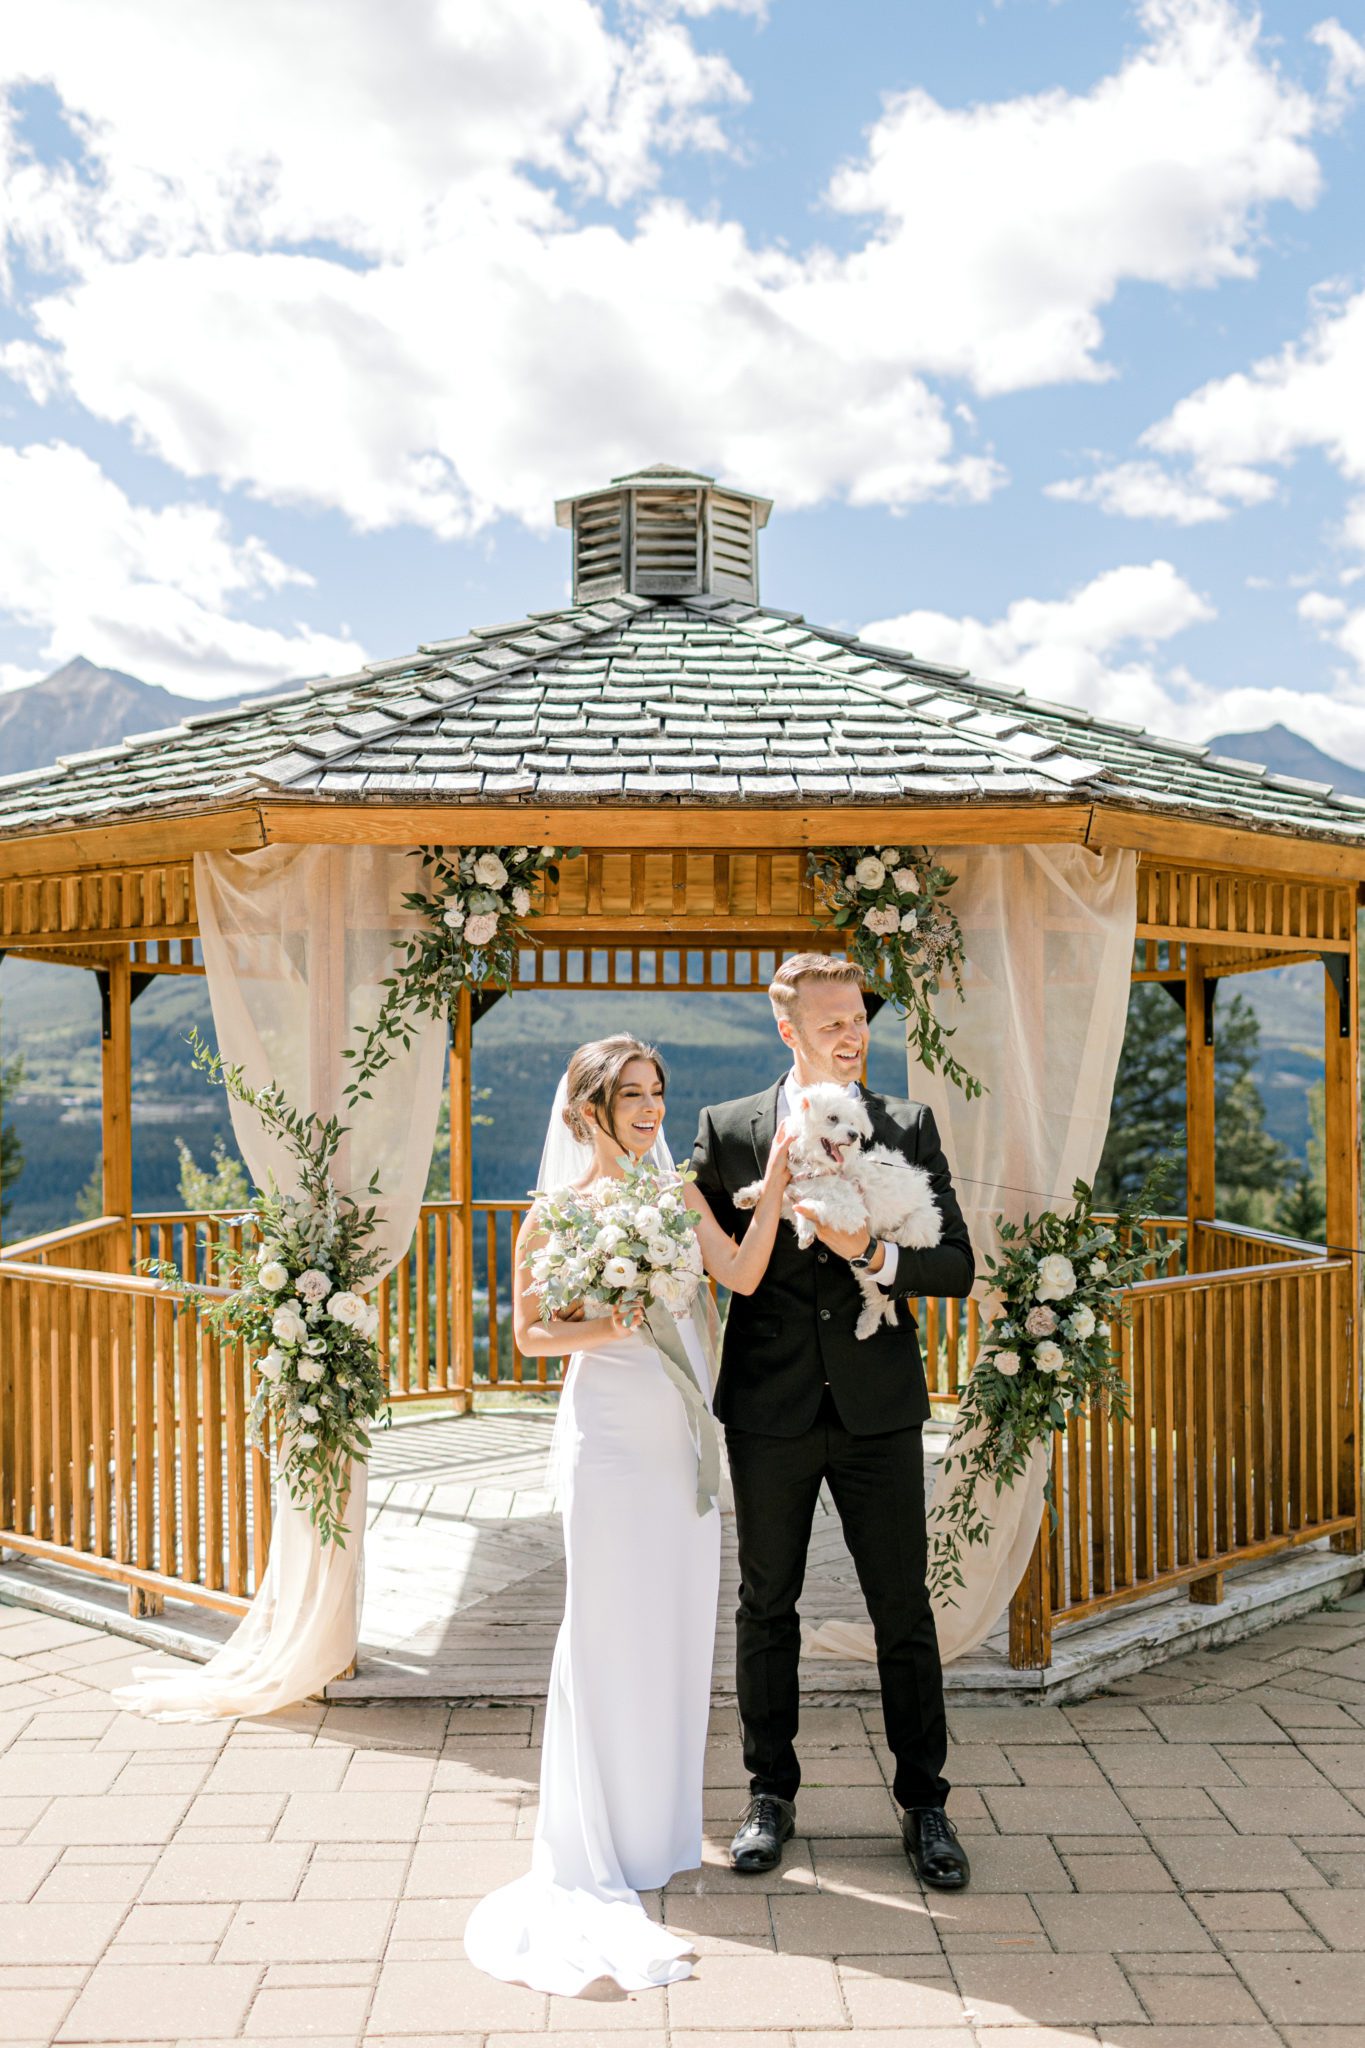 Intimate September wedding in Canmore features outdoor ceremony and how to include your dog in the ceremony.